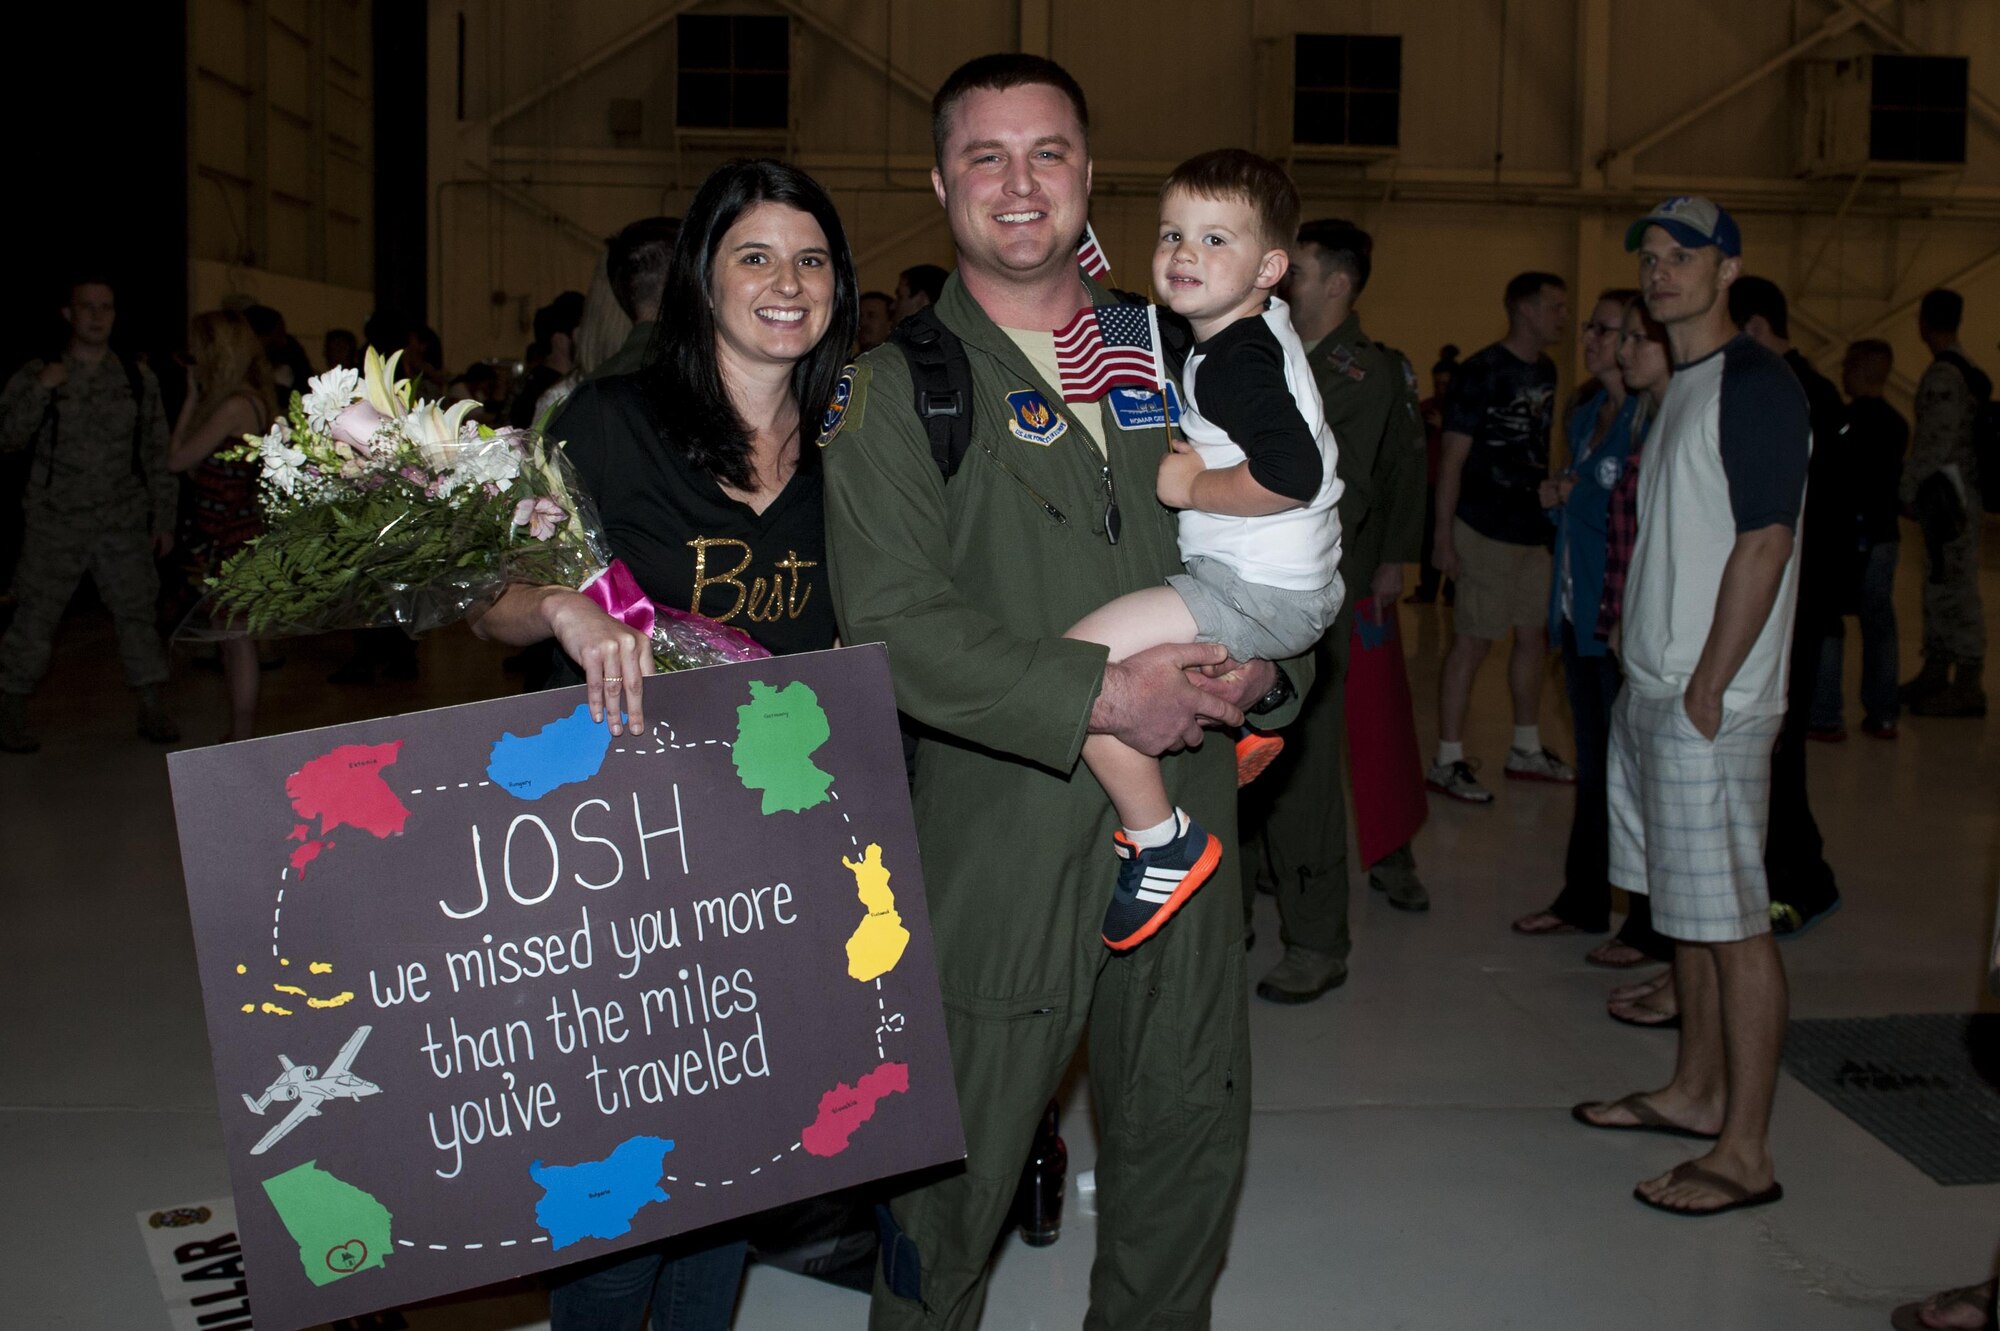 U.S. Air Force Capt. Joshua Geidel, 74th Expeditionary Fighter Squadron current operations flight commander, poses for a photo with his wife, Courtney, and son, Graham, March 30, 2016, at Moody Air Force Base, Ga. Geidel returned home from a six-month deployment in Eastern Europe in support of Operation Atlantic Resolve. (U.S. Air Force photo by Airman 1st Class Lauren M. Hunter/Released)